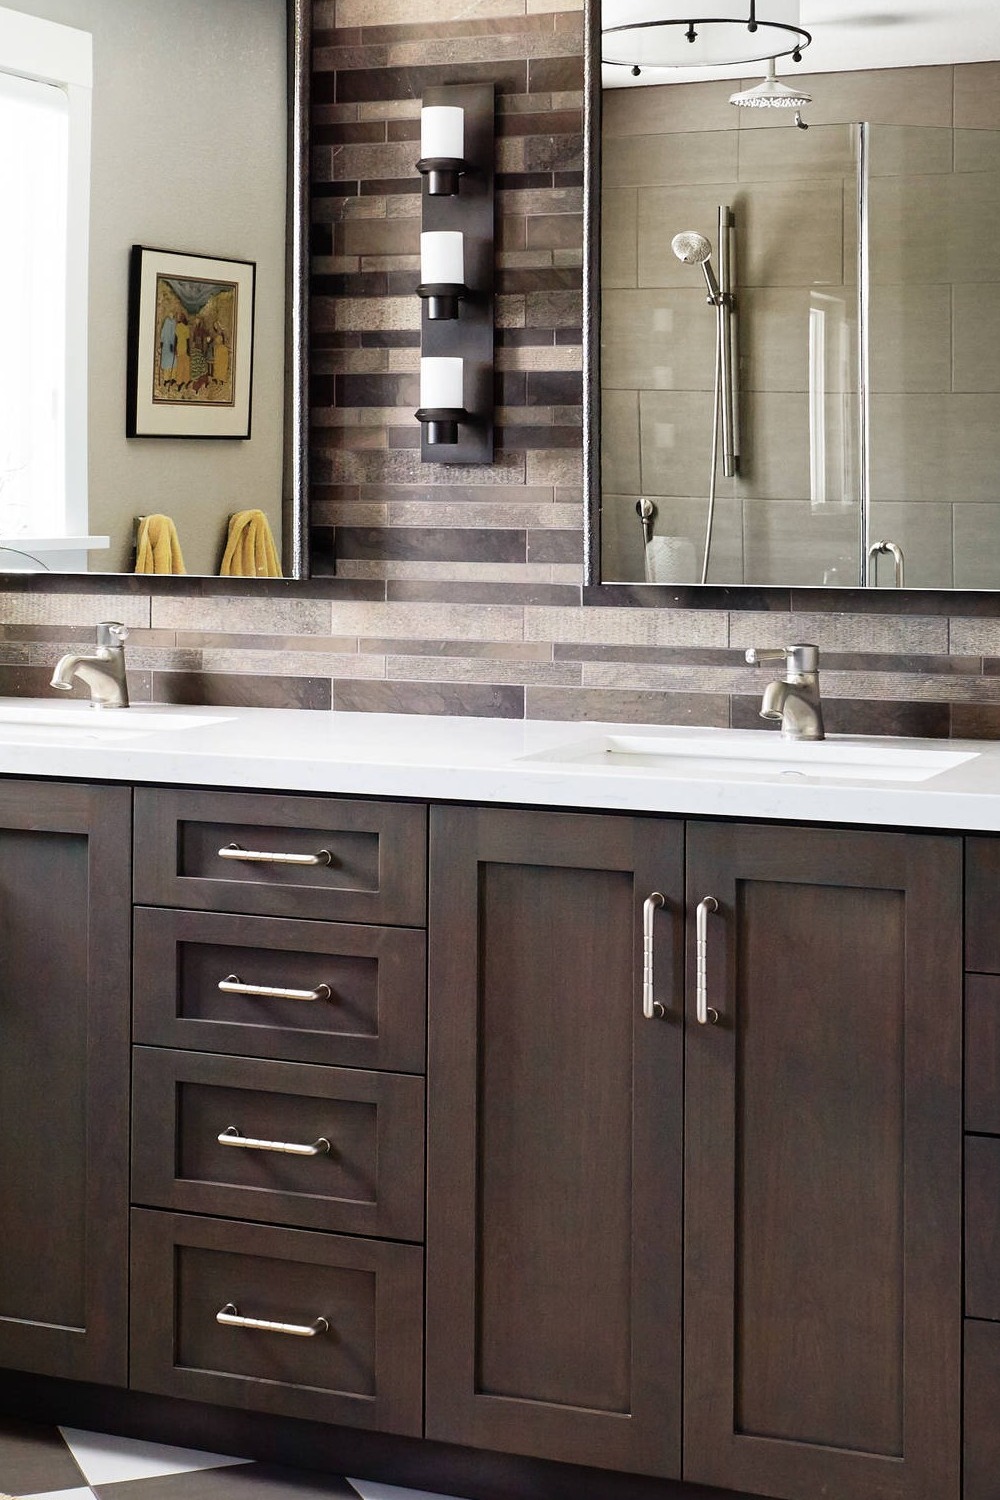 35 Dark Bathroom Cabinets With White, Dark Bathroom Cabinets With Light Countertops